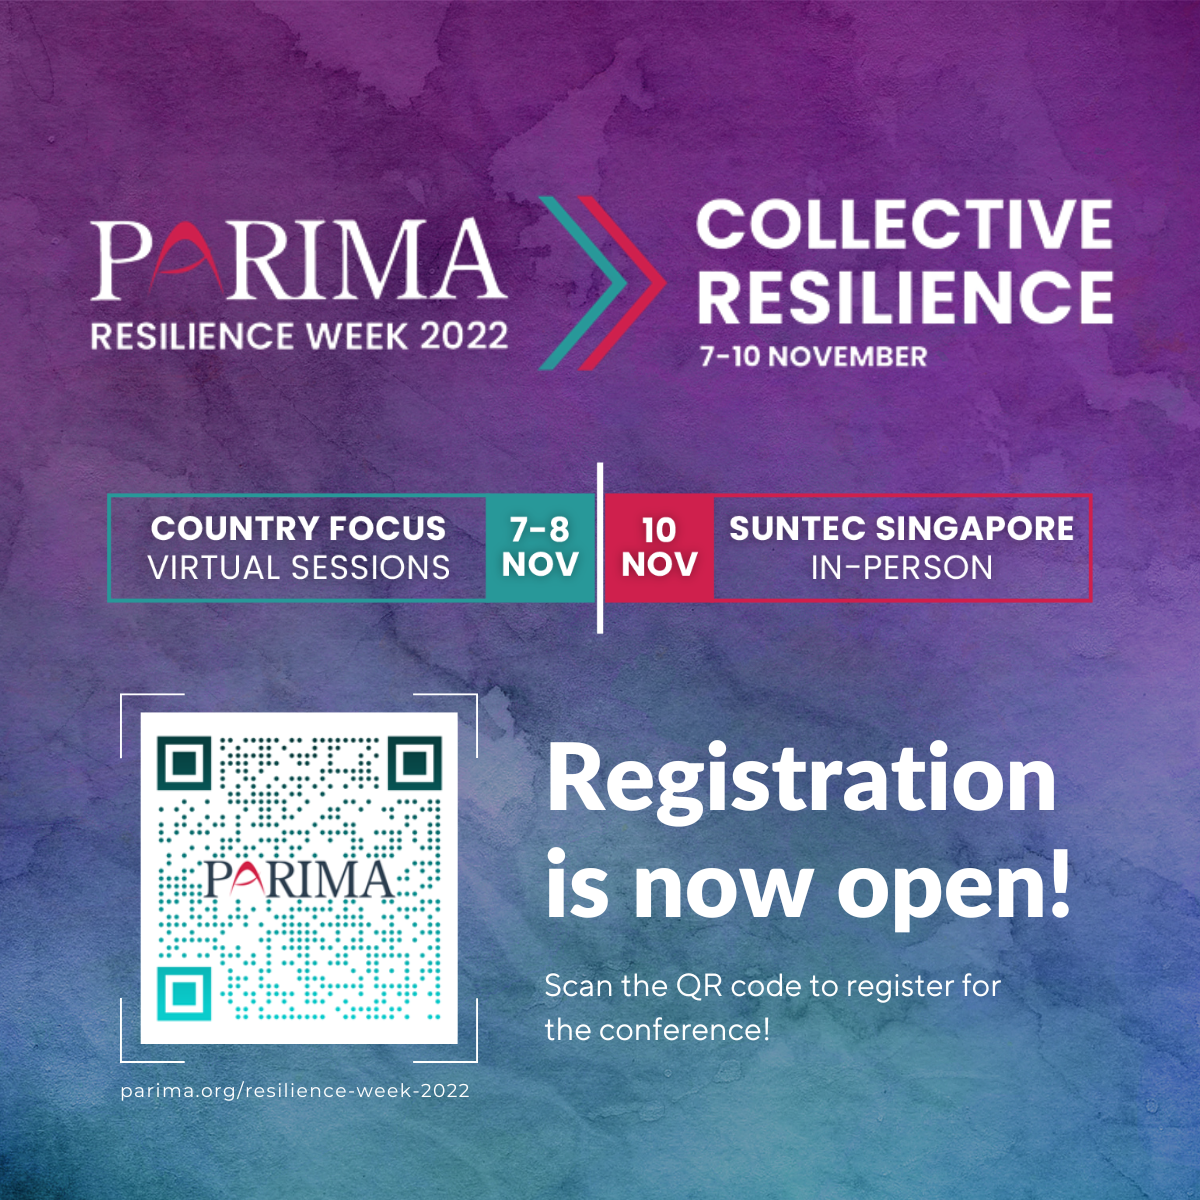 PARIMA is delighted to bring a different twist to the Resilience Week 2022